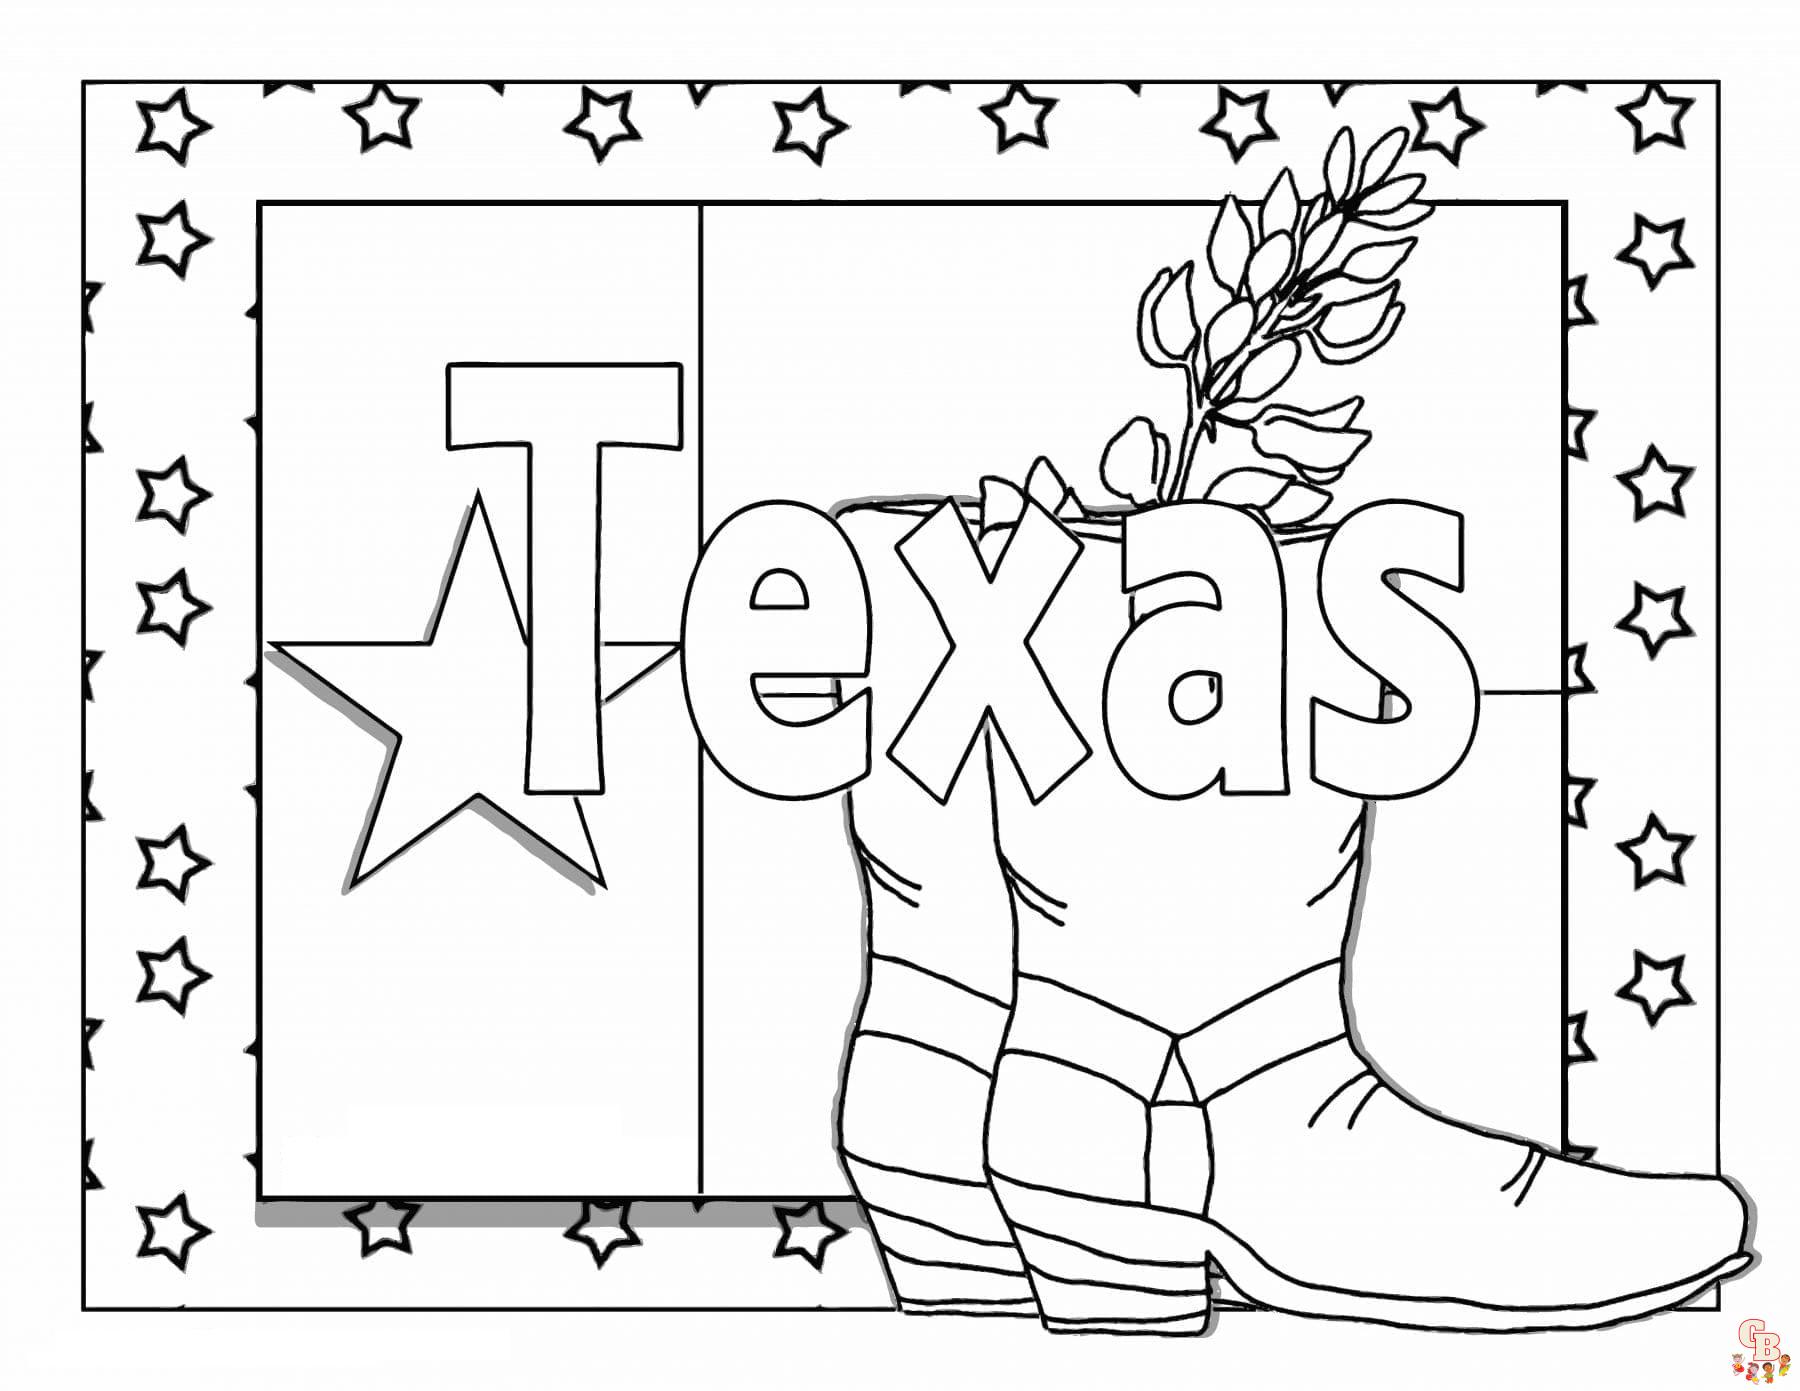 Texas coloring pages to print free